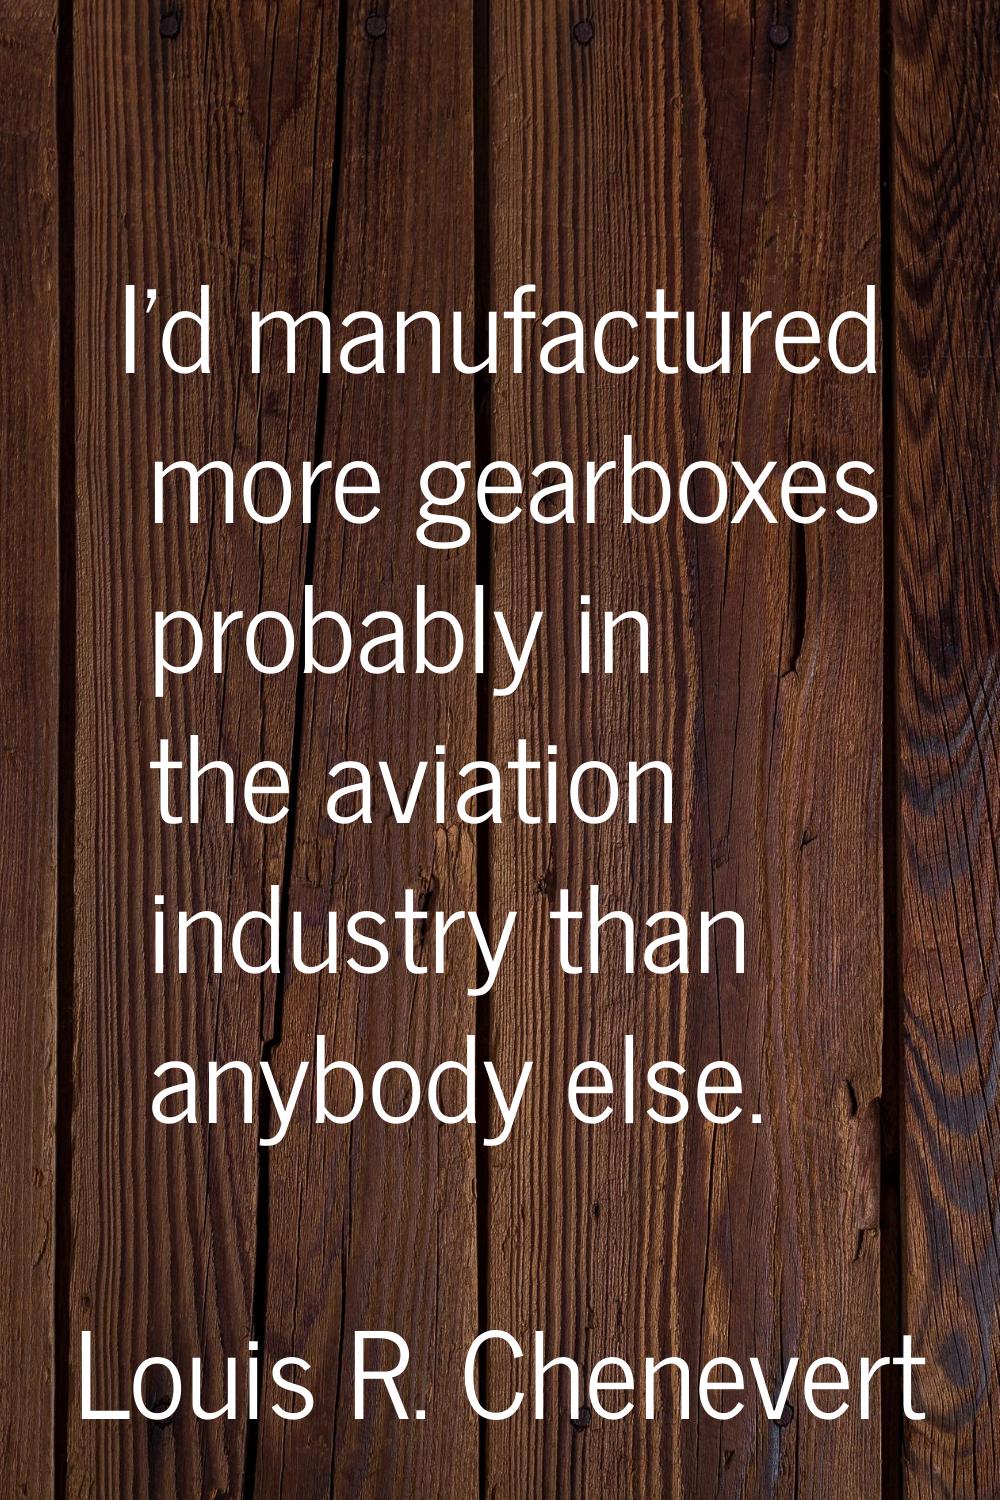 I'd manufactured more gearboxes probably in the aviation industry than anybody else.